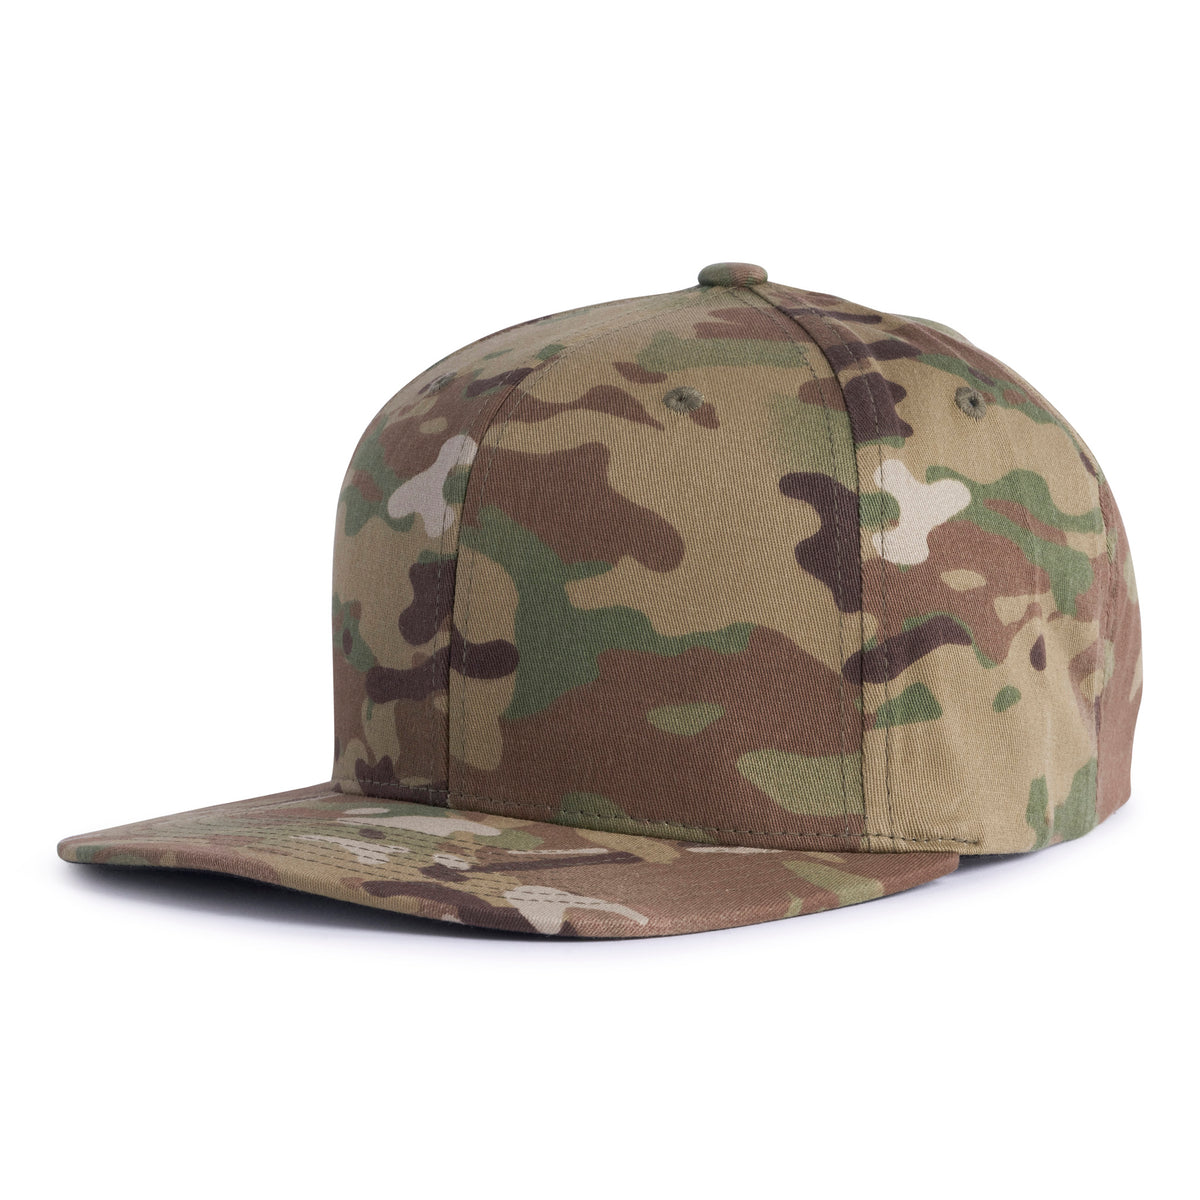 Tan camo flat bill trucker hat with 6-panels, structured mid/high crown, and a snapback closure from Tailgate Hats.